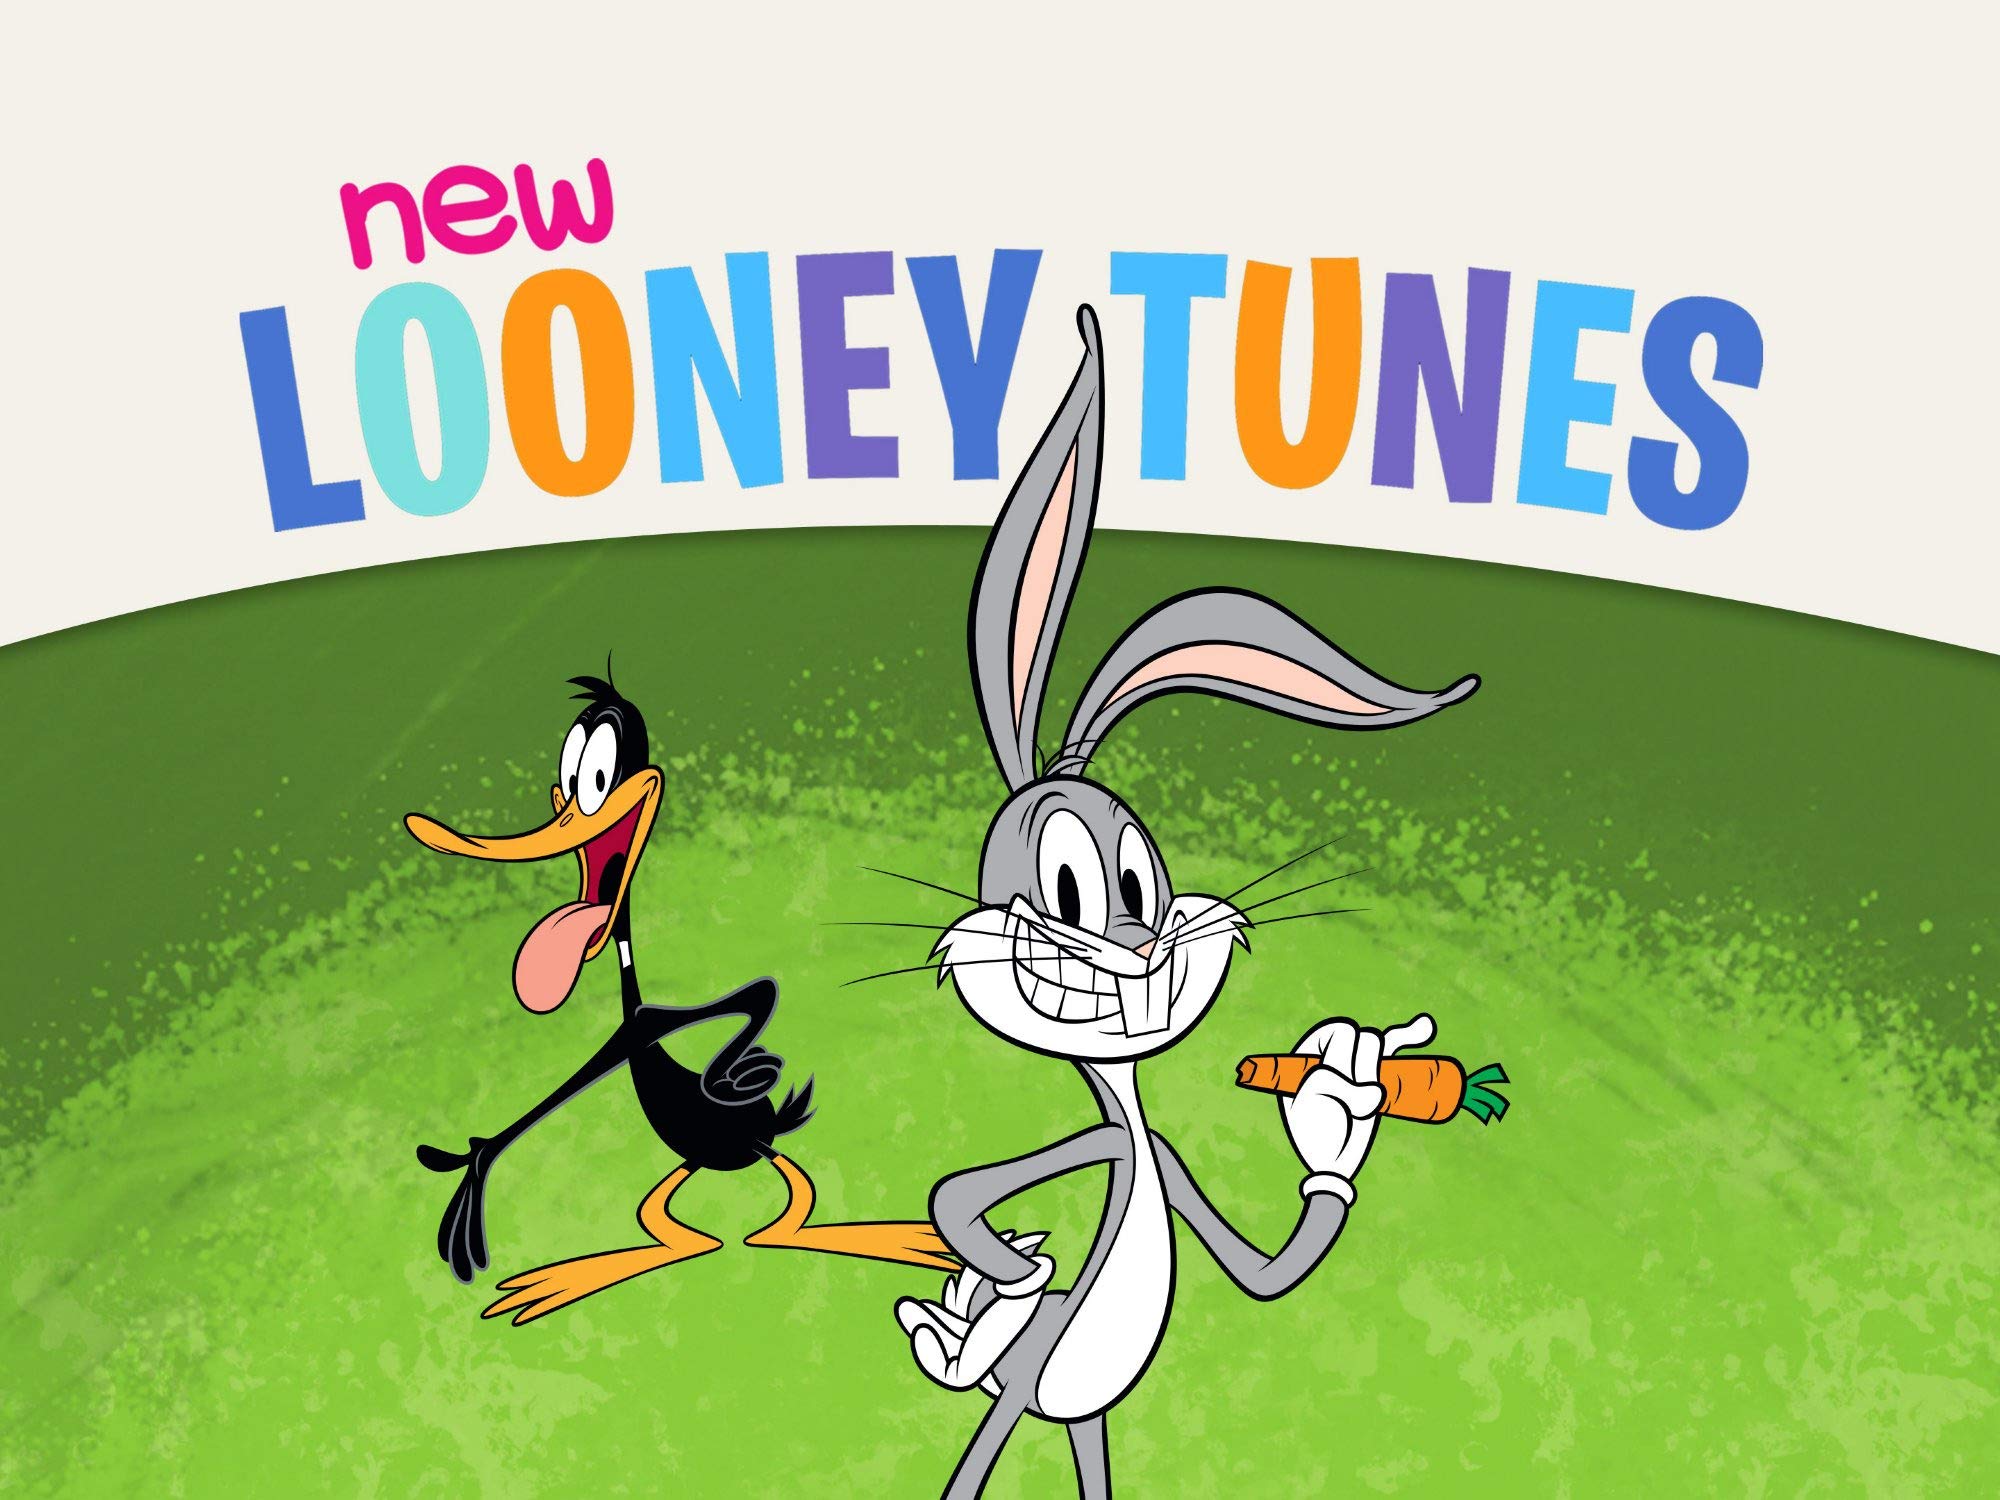 Bugs Bunny and Daffy Duck are back in a new Looney Tunes series. - Looney Tunes